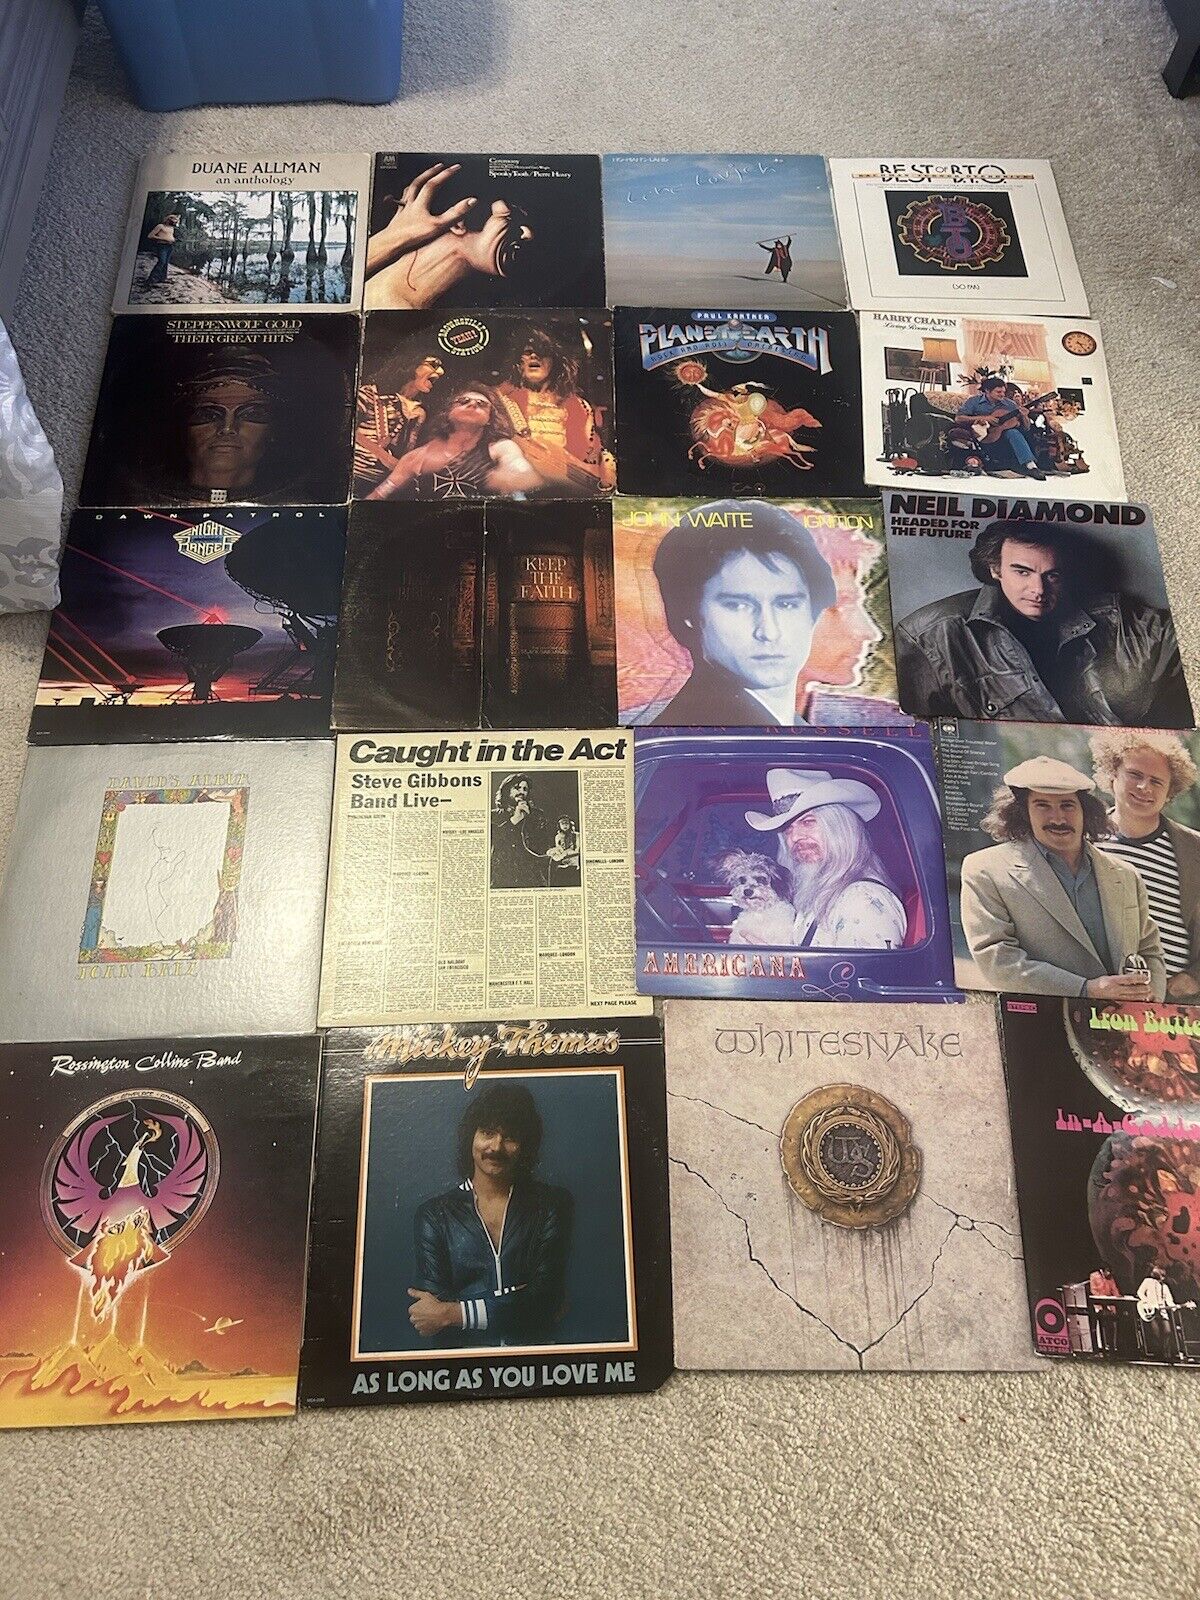 Huge Lot 74 Vintage Rock Vinyl LP’s What You See Is What You Get. Great Artist